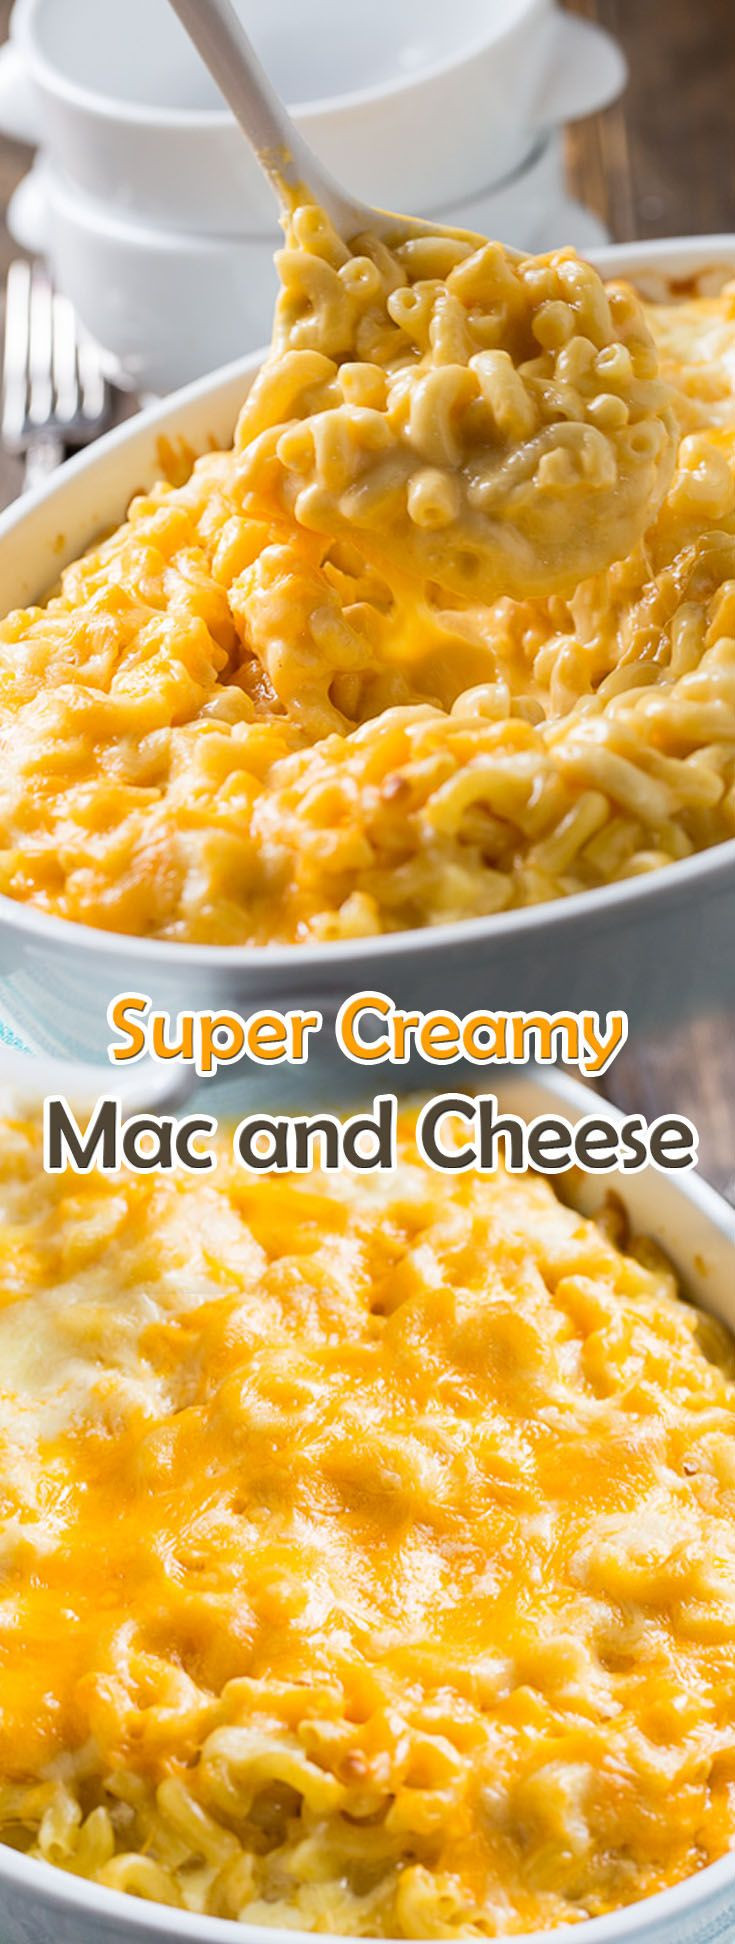 Baked Macaroni And Cheese With Heavy Cream
 Super Creamy Mac and Cheese Super Bowl